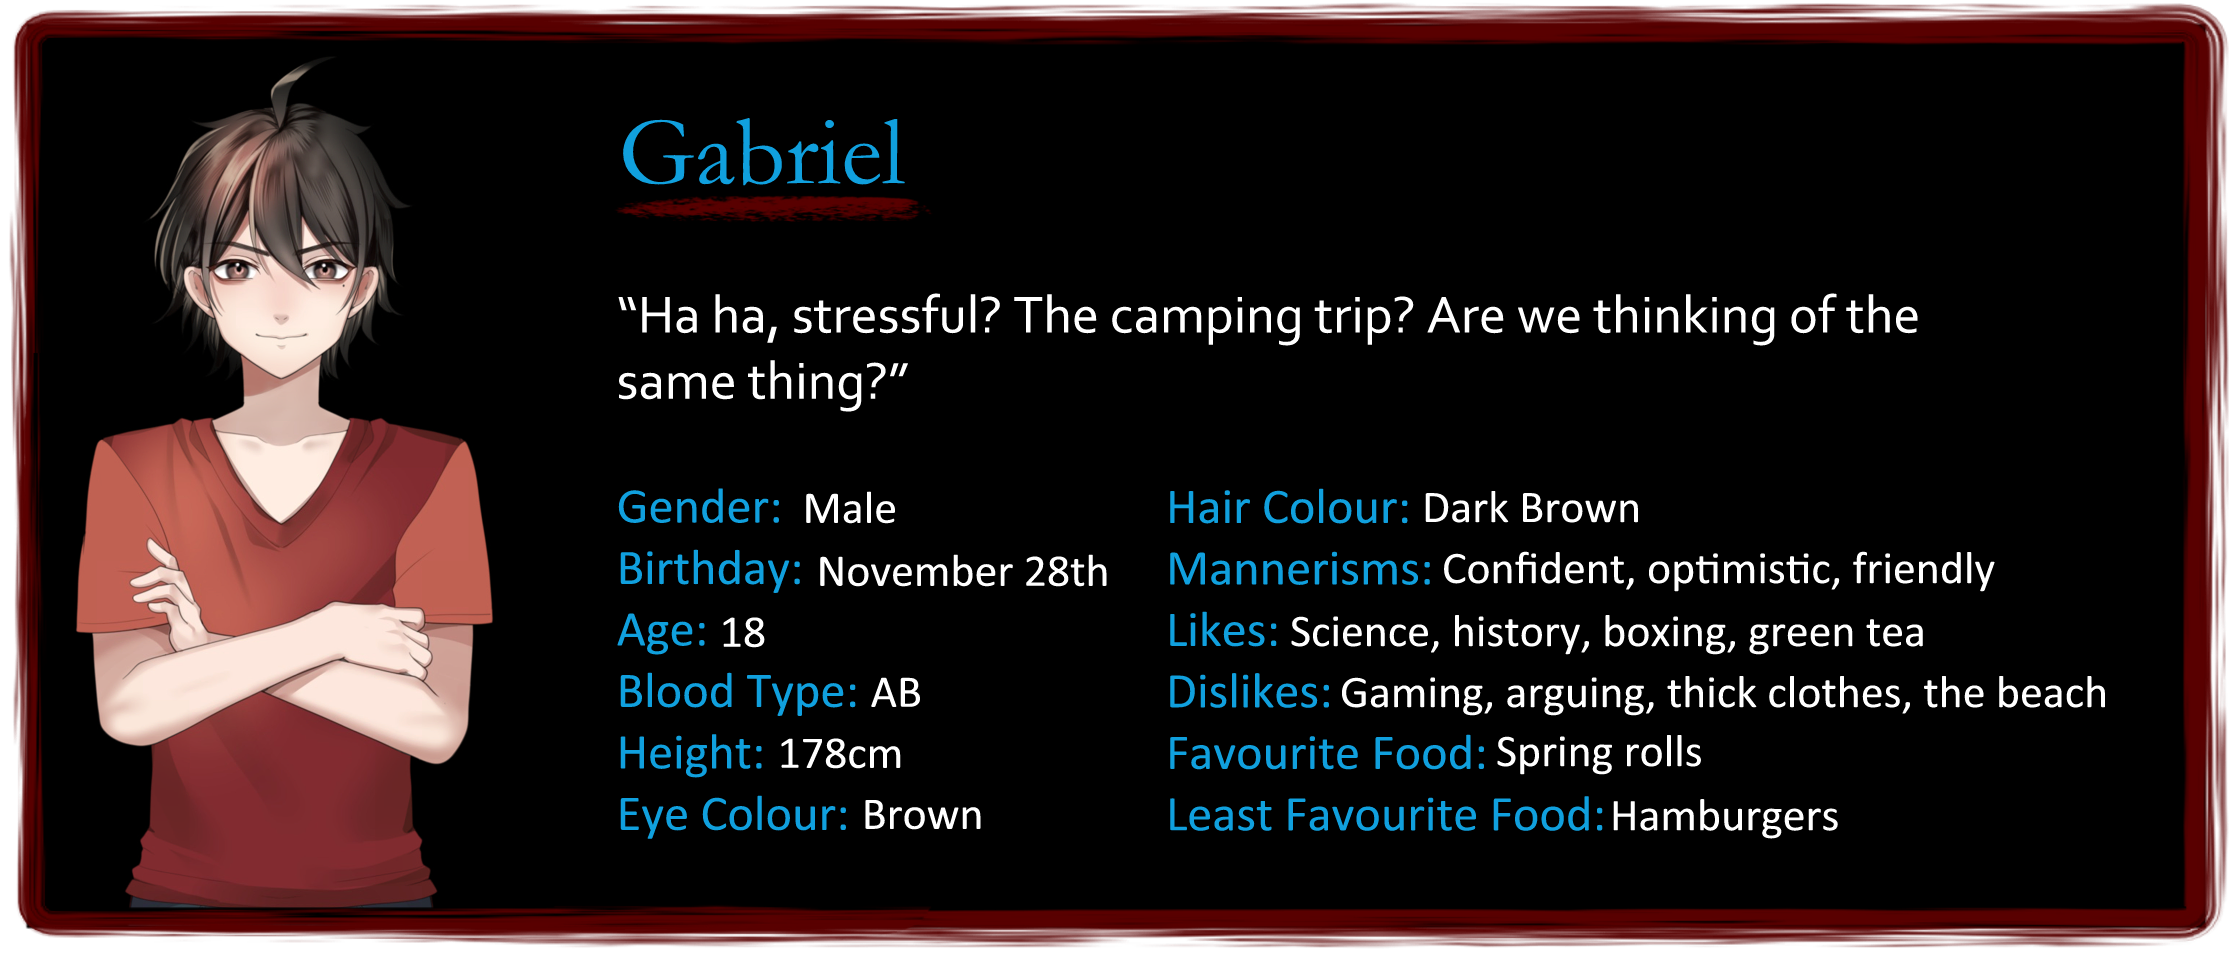 A profile card containing information about Gabriel, one of the characters in The Many Deaths of Lily Kosen